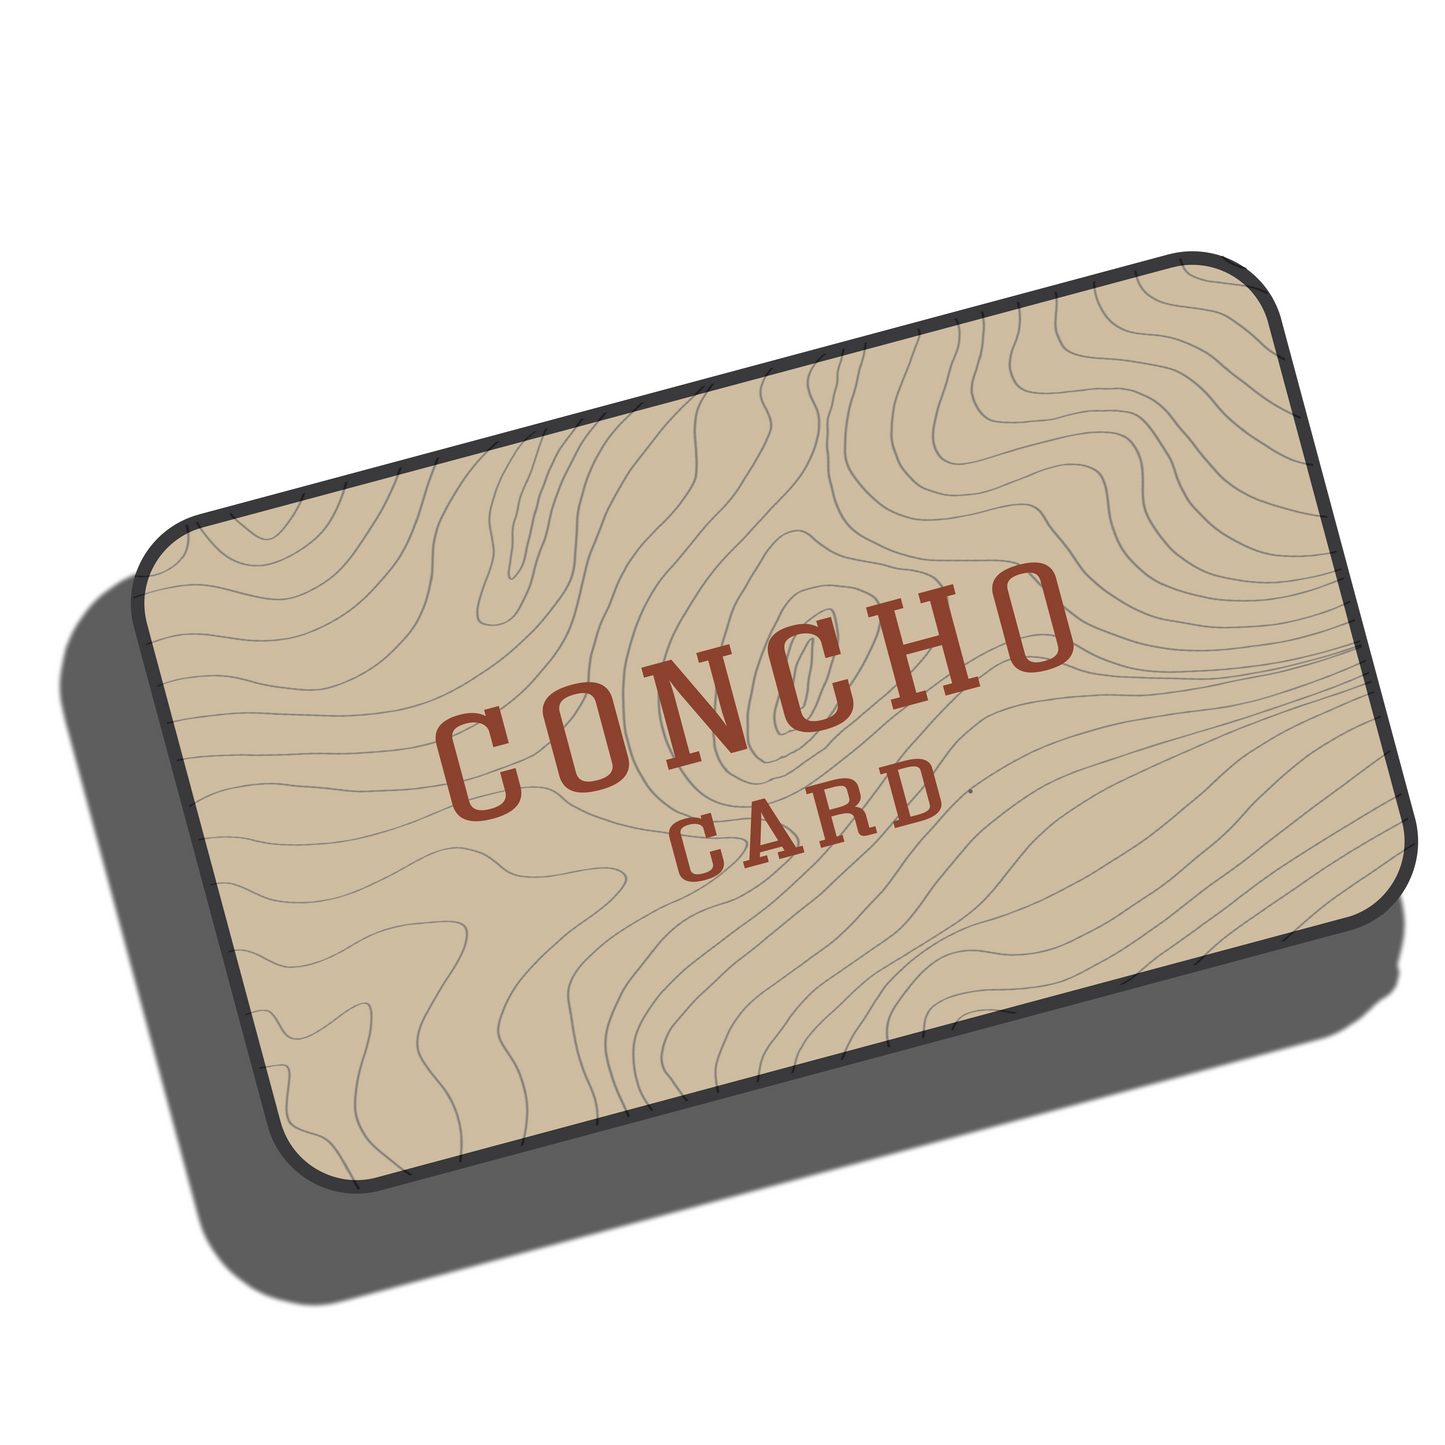 The Concho Card